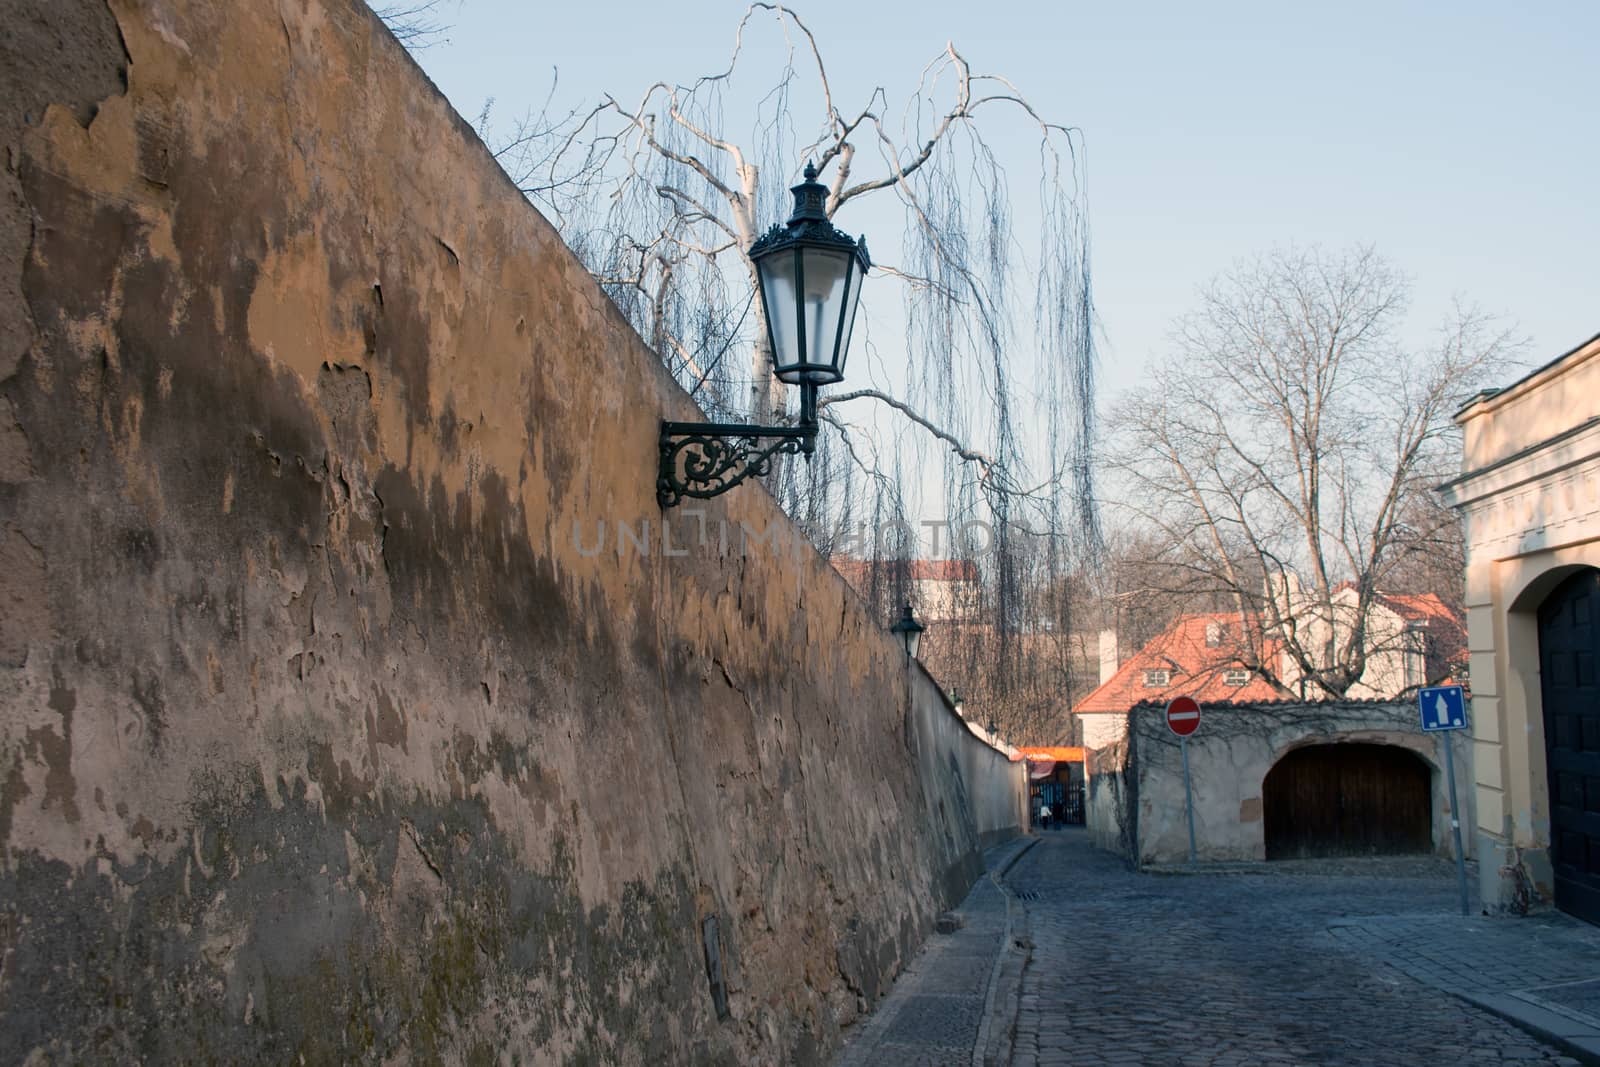 Traditional street lamp on a street in the Old Town of Prague, Czech Republic